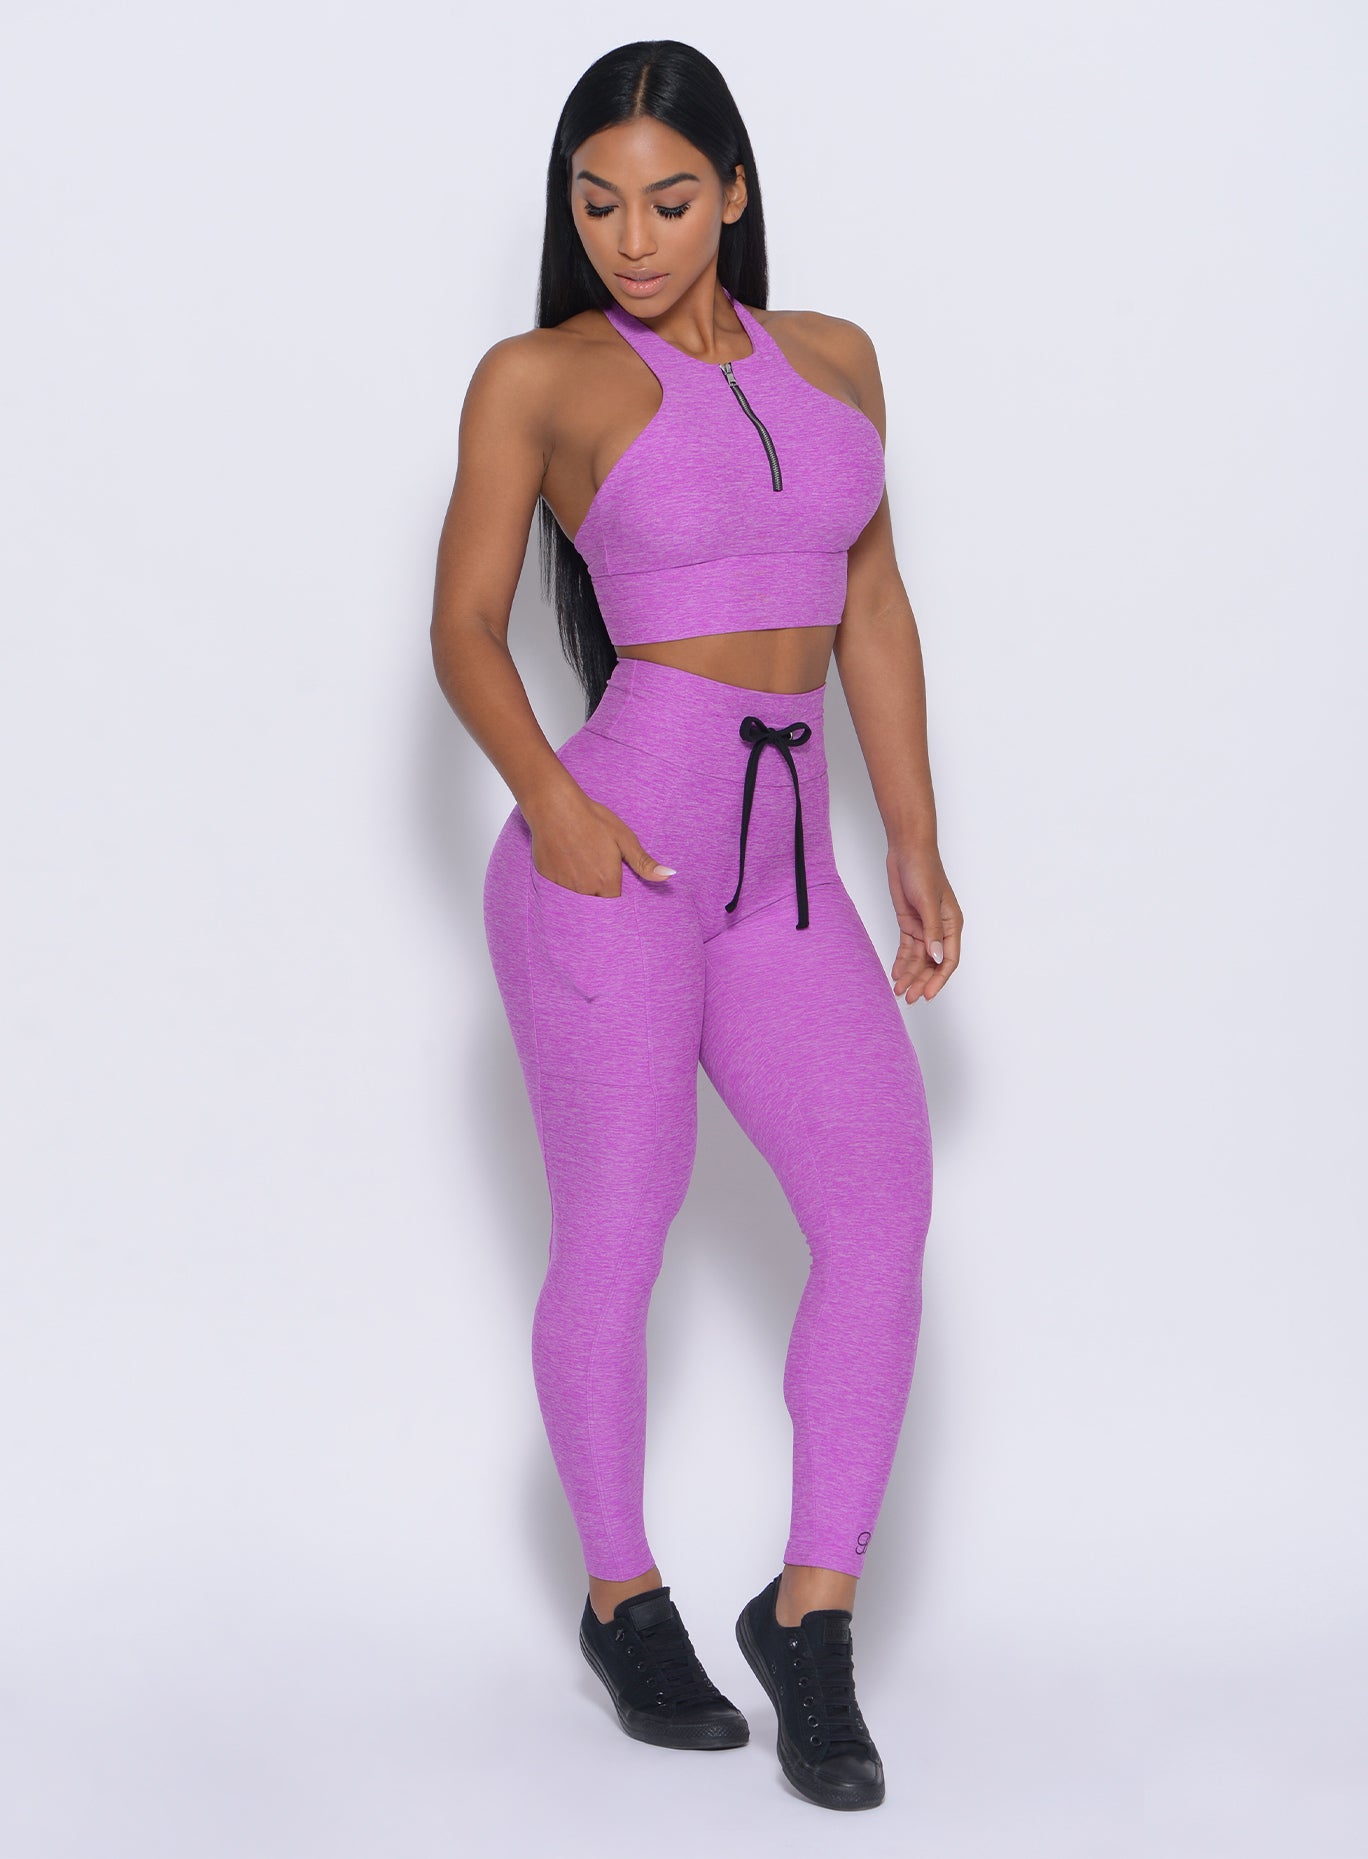 Front profile view of the model facing down wearing our thrive leggings in purple color and a matching bra 